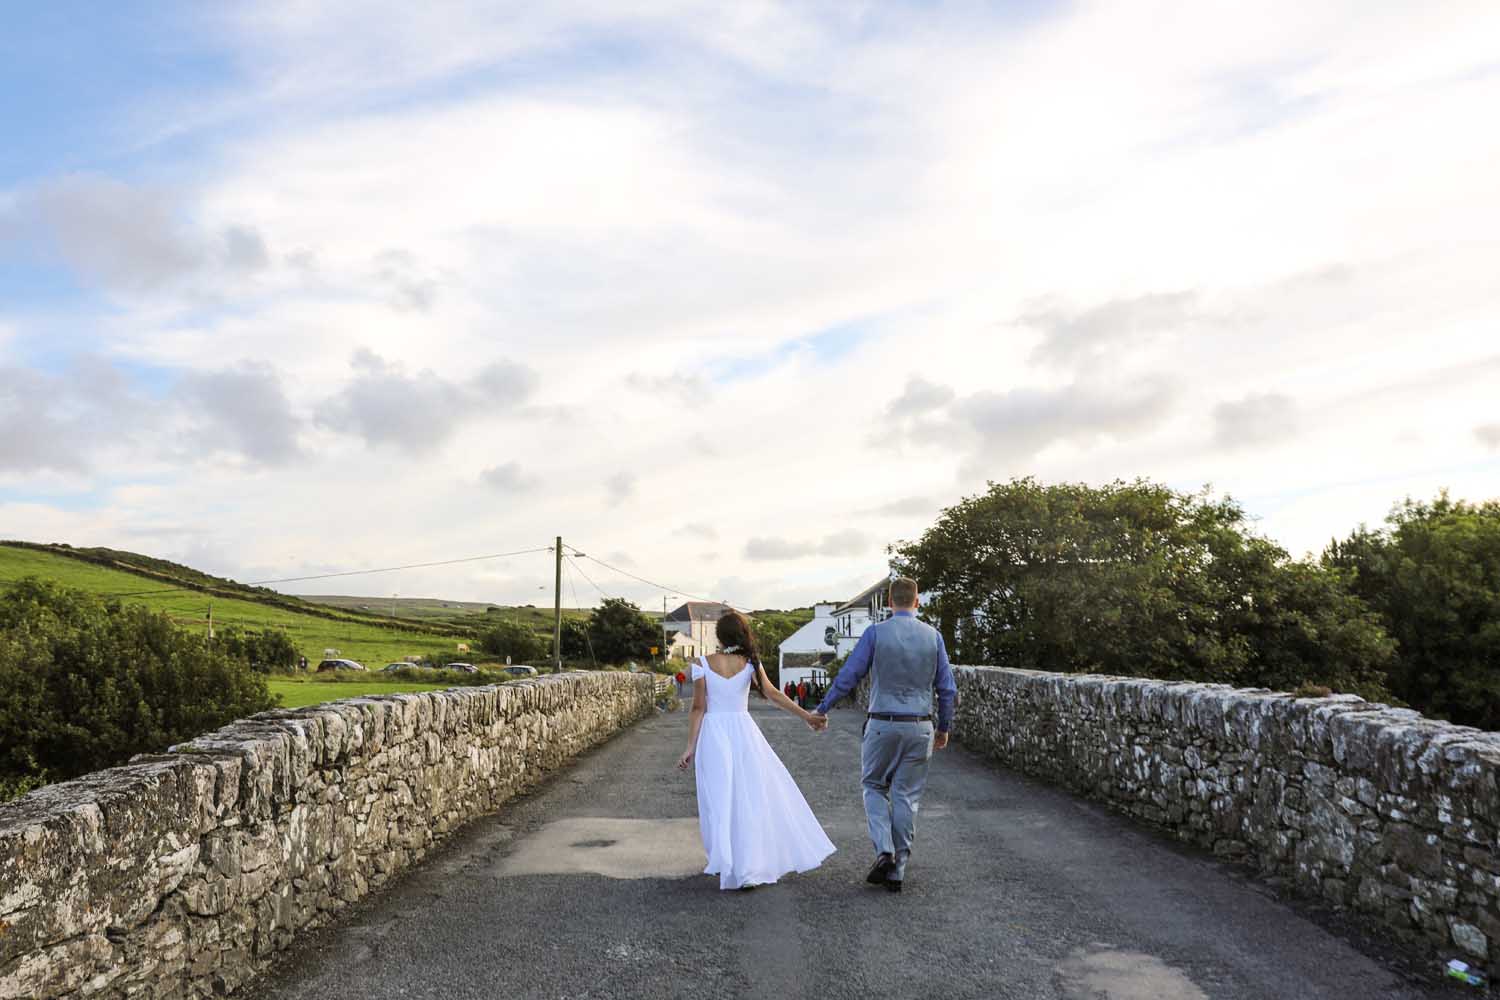 Newly married couple walking an irish country road